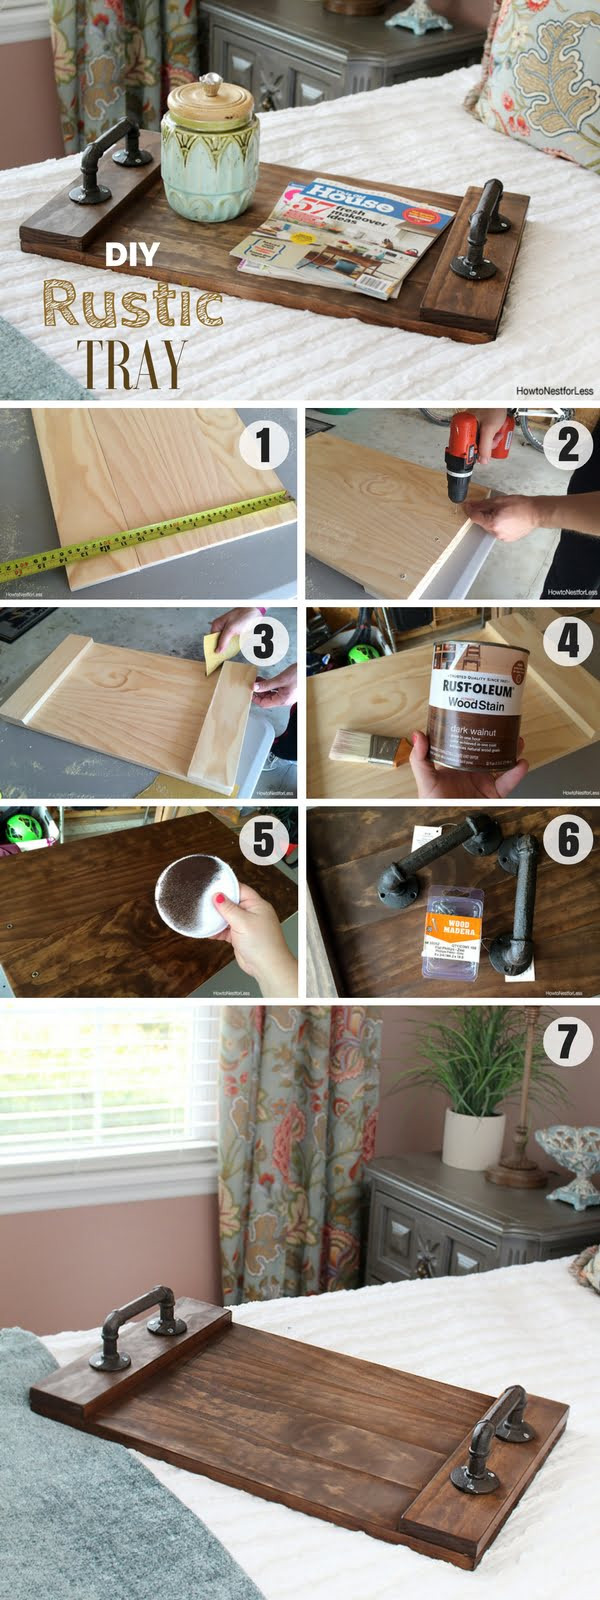 Wood Craft Ideas To Make
 18 Easy DIY Wood Craft Project Ideas on a Bud